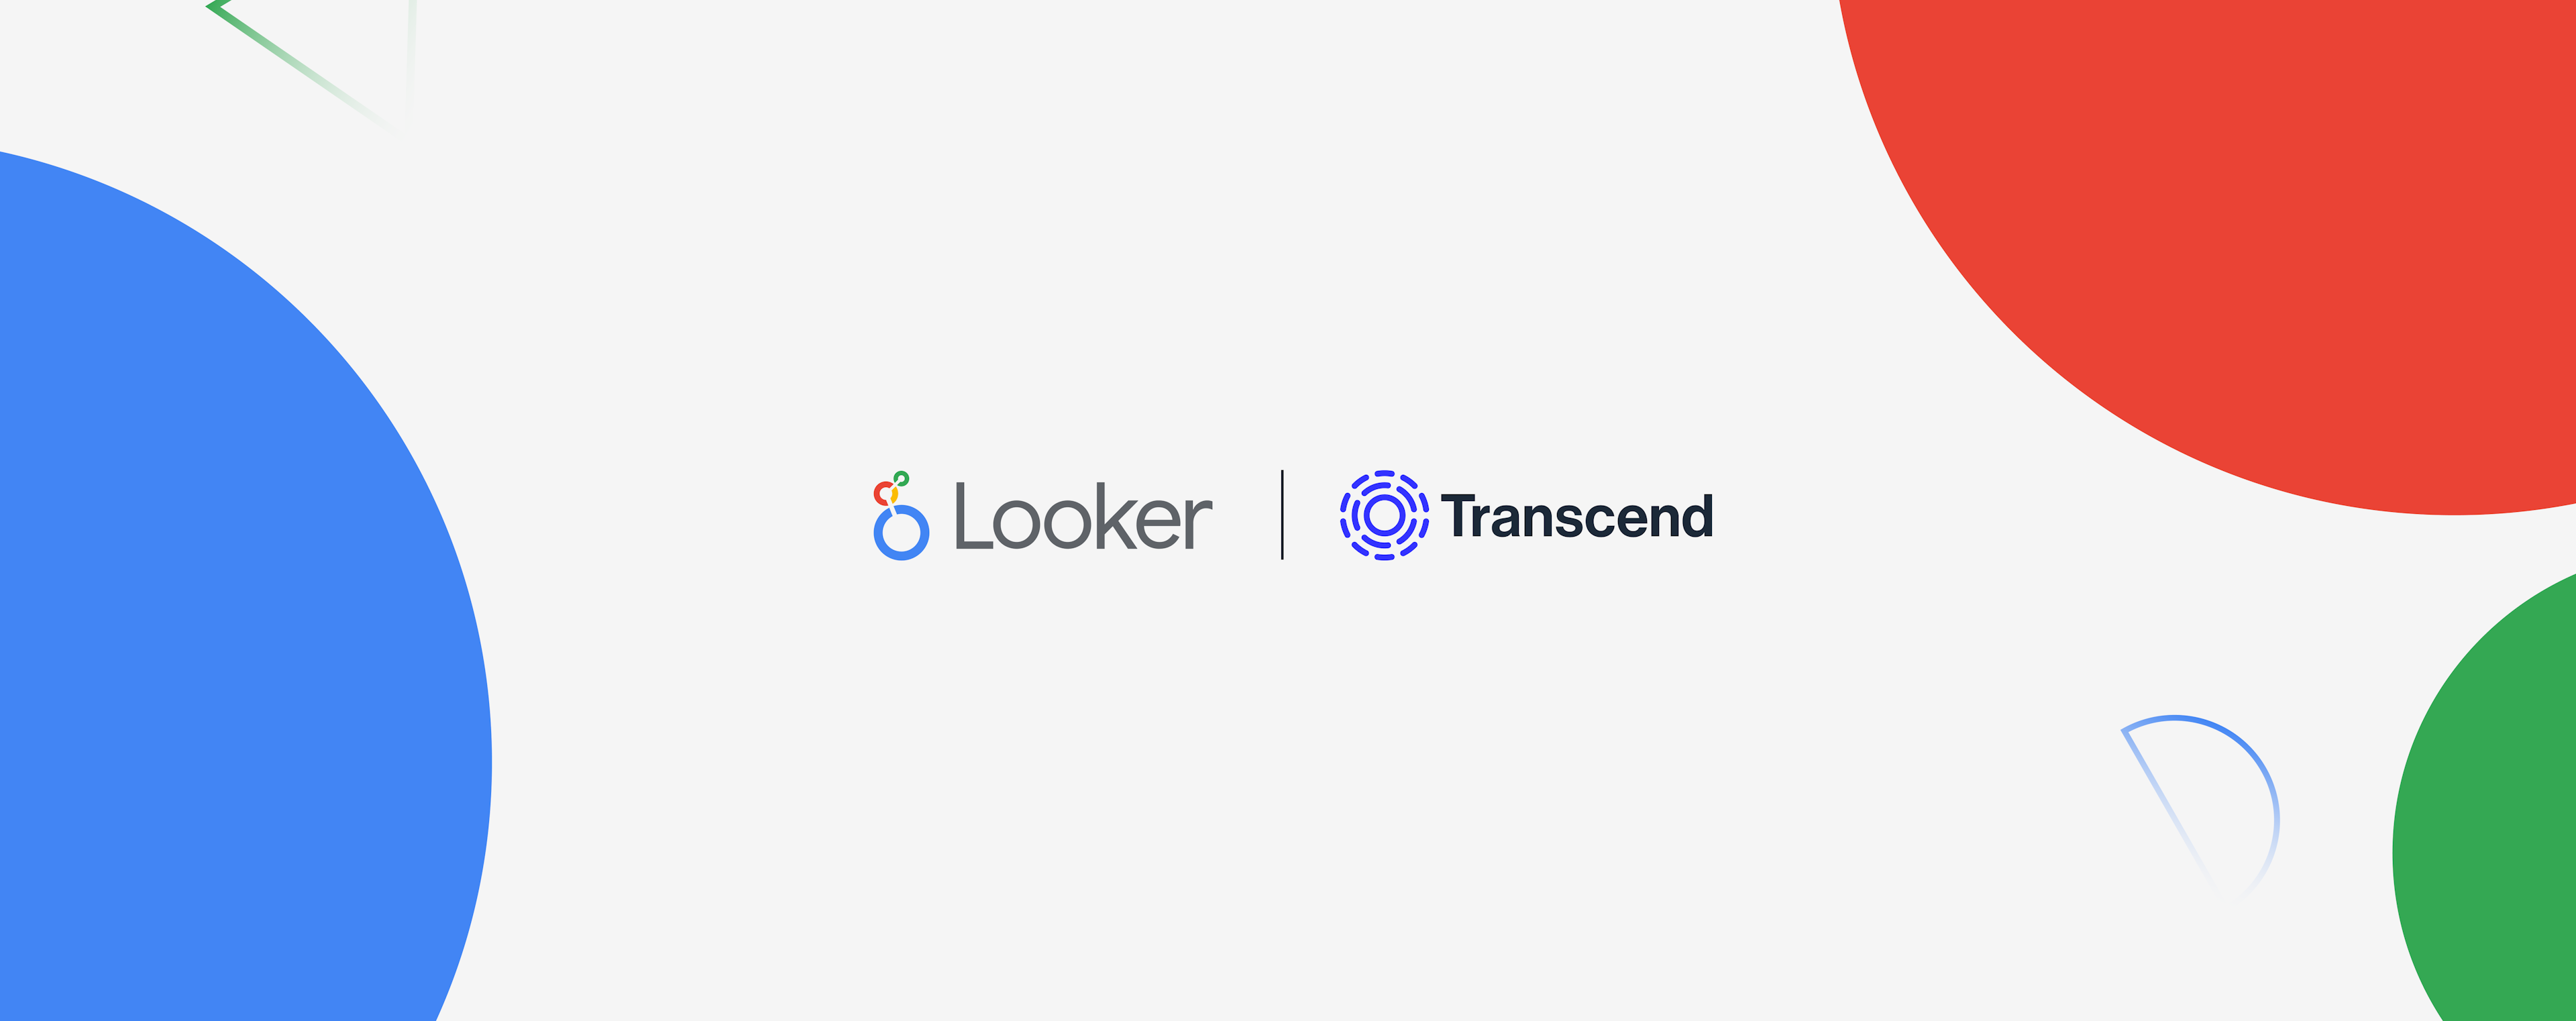 Looker and Transcend logos